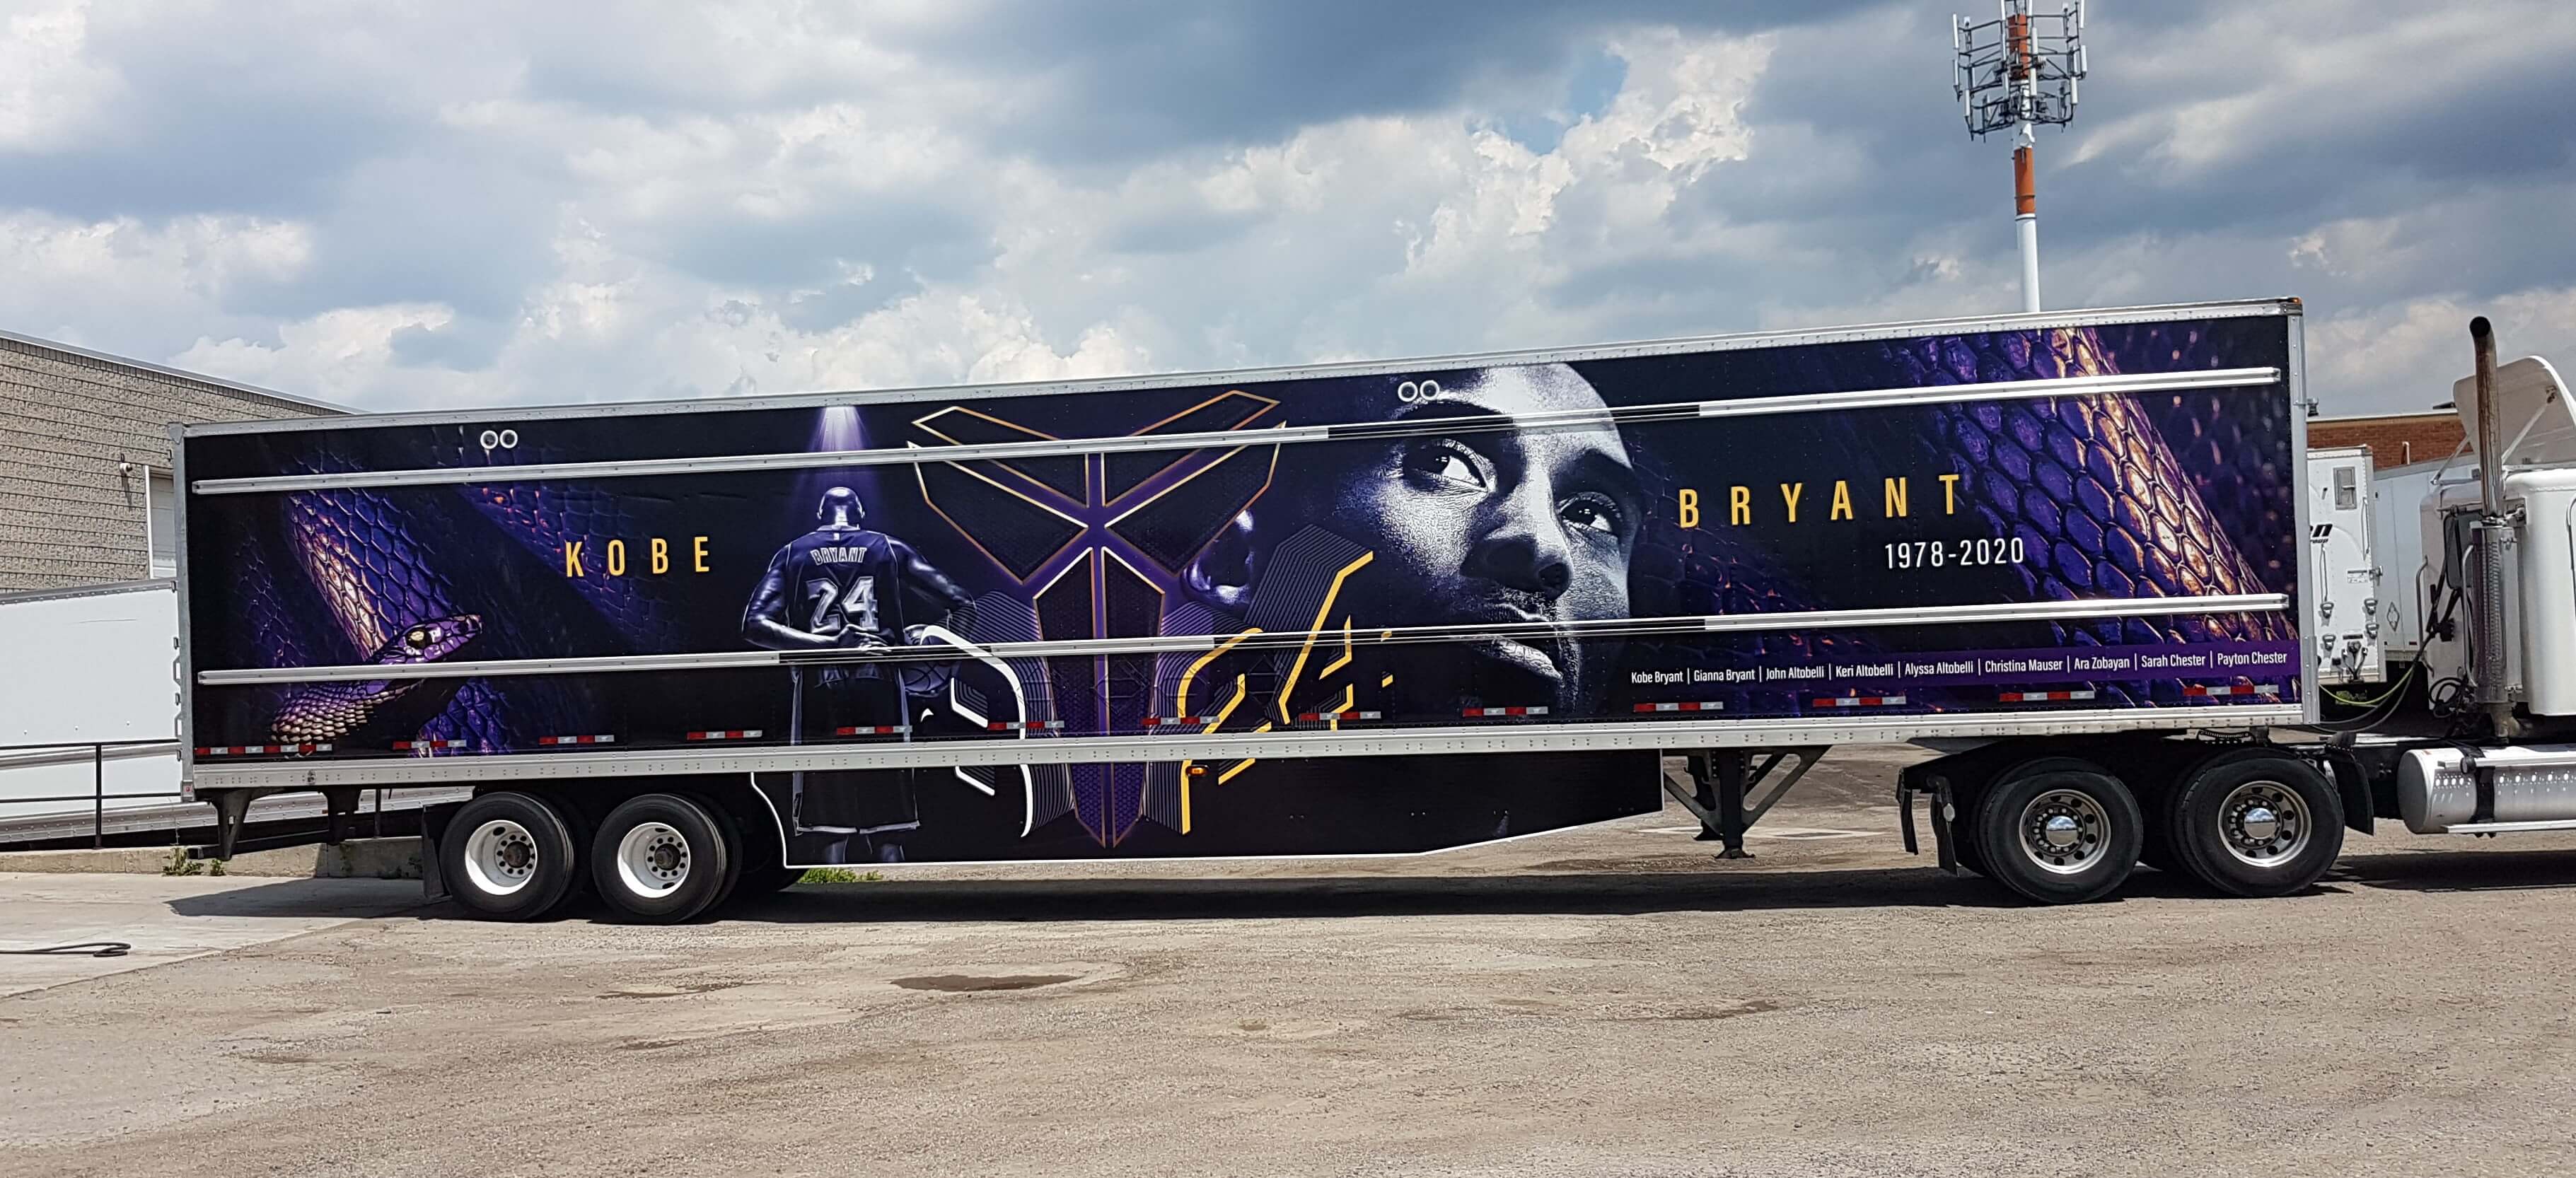 Kobe Bryant trailer wrap tribute by Turbo Images the leader in trailer wraps that delivers the most awesome trailer wraps. For a great design and custom vinyl truck or trailer wrapping job, contact Turbo Images.